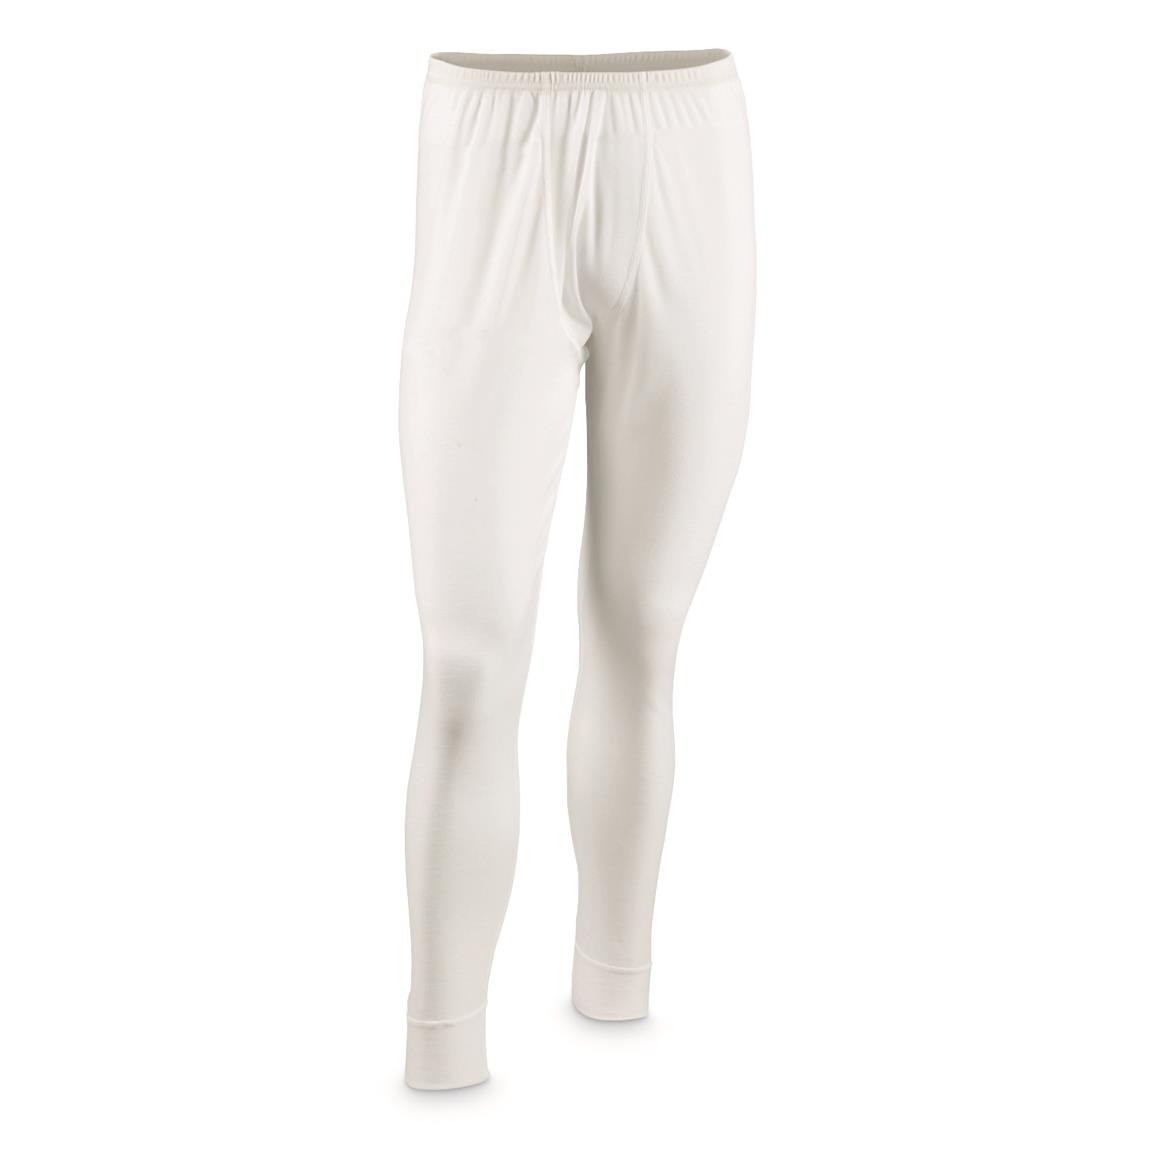 Dutch Military Surplus Long Johns 3 Pack New 702395 Military Underwear And Long Johns At